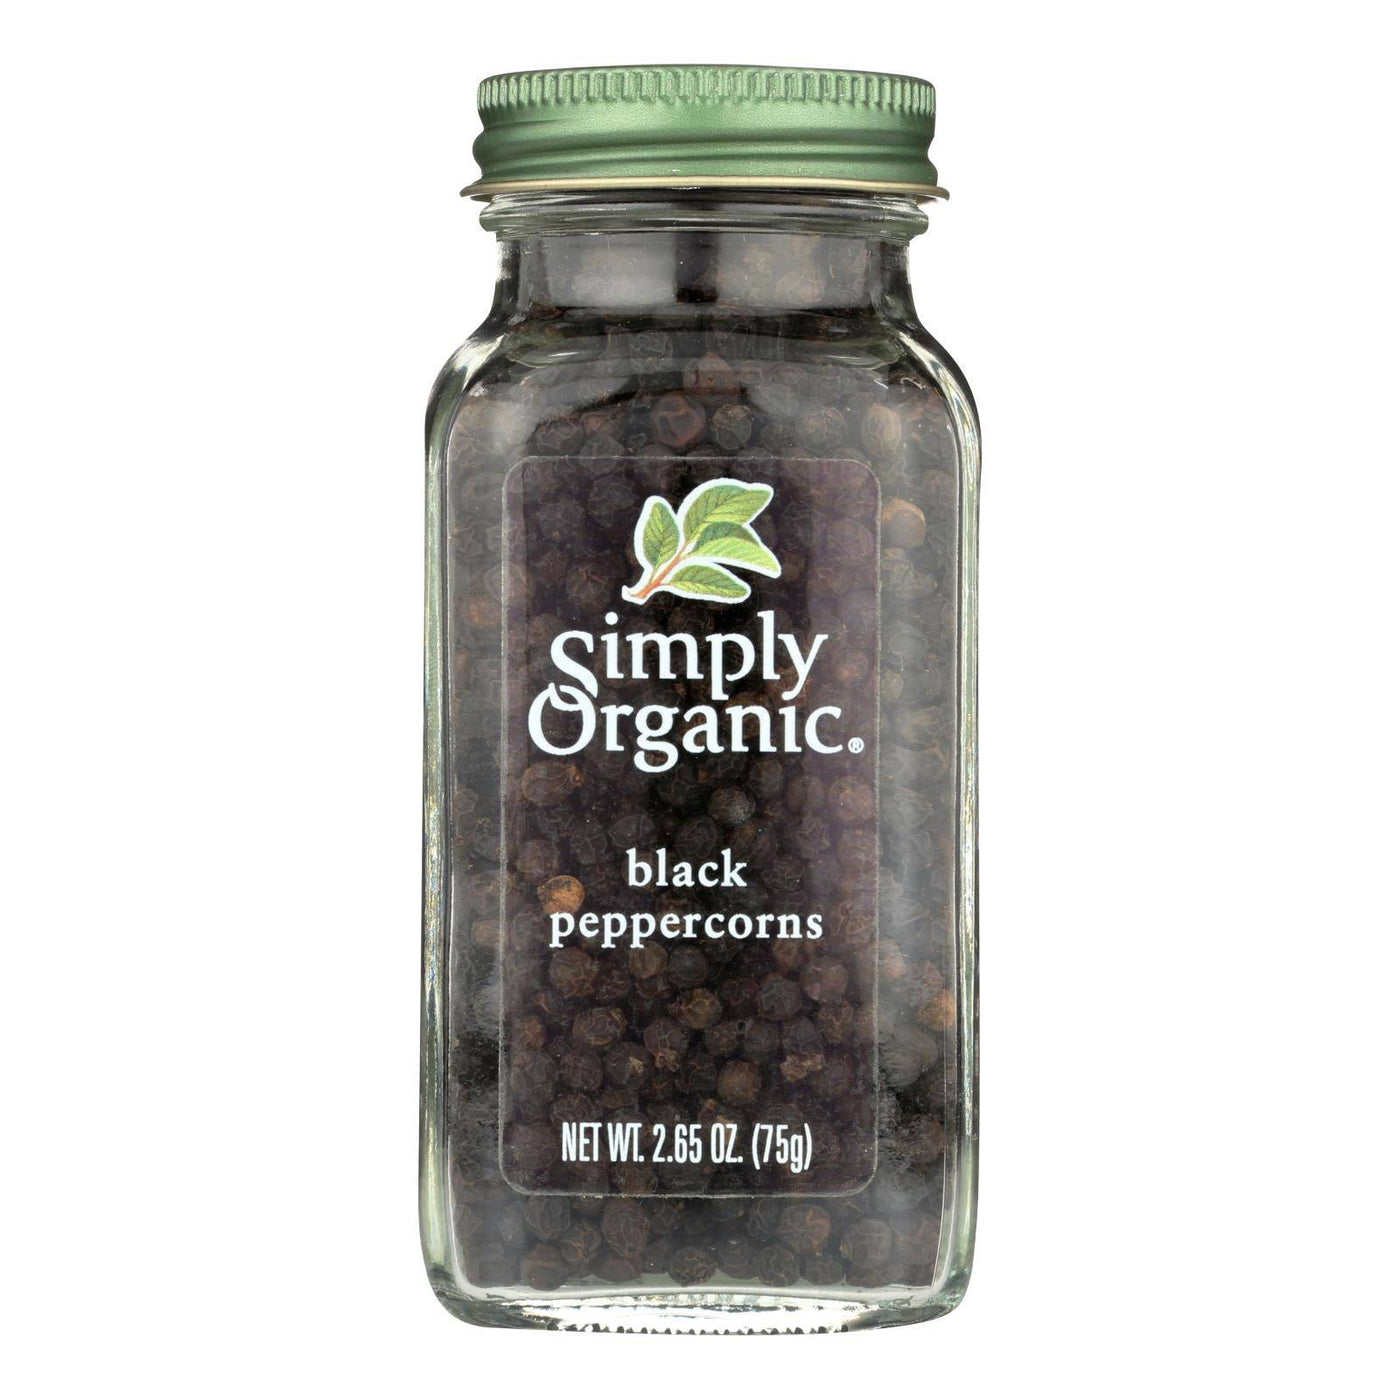 Simply Organic Black Peppercorns - Case Of 6 - 2.65 Oz. | OnlyNaturals.us